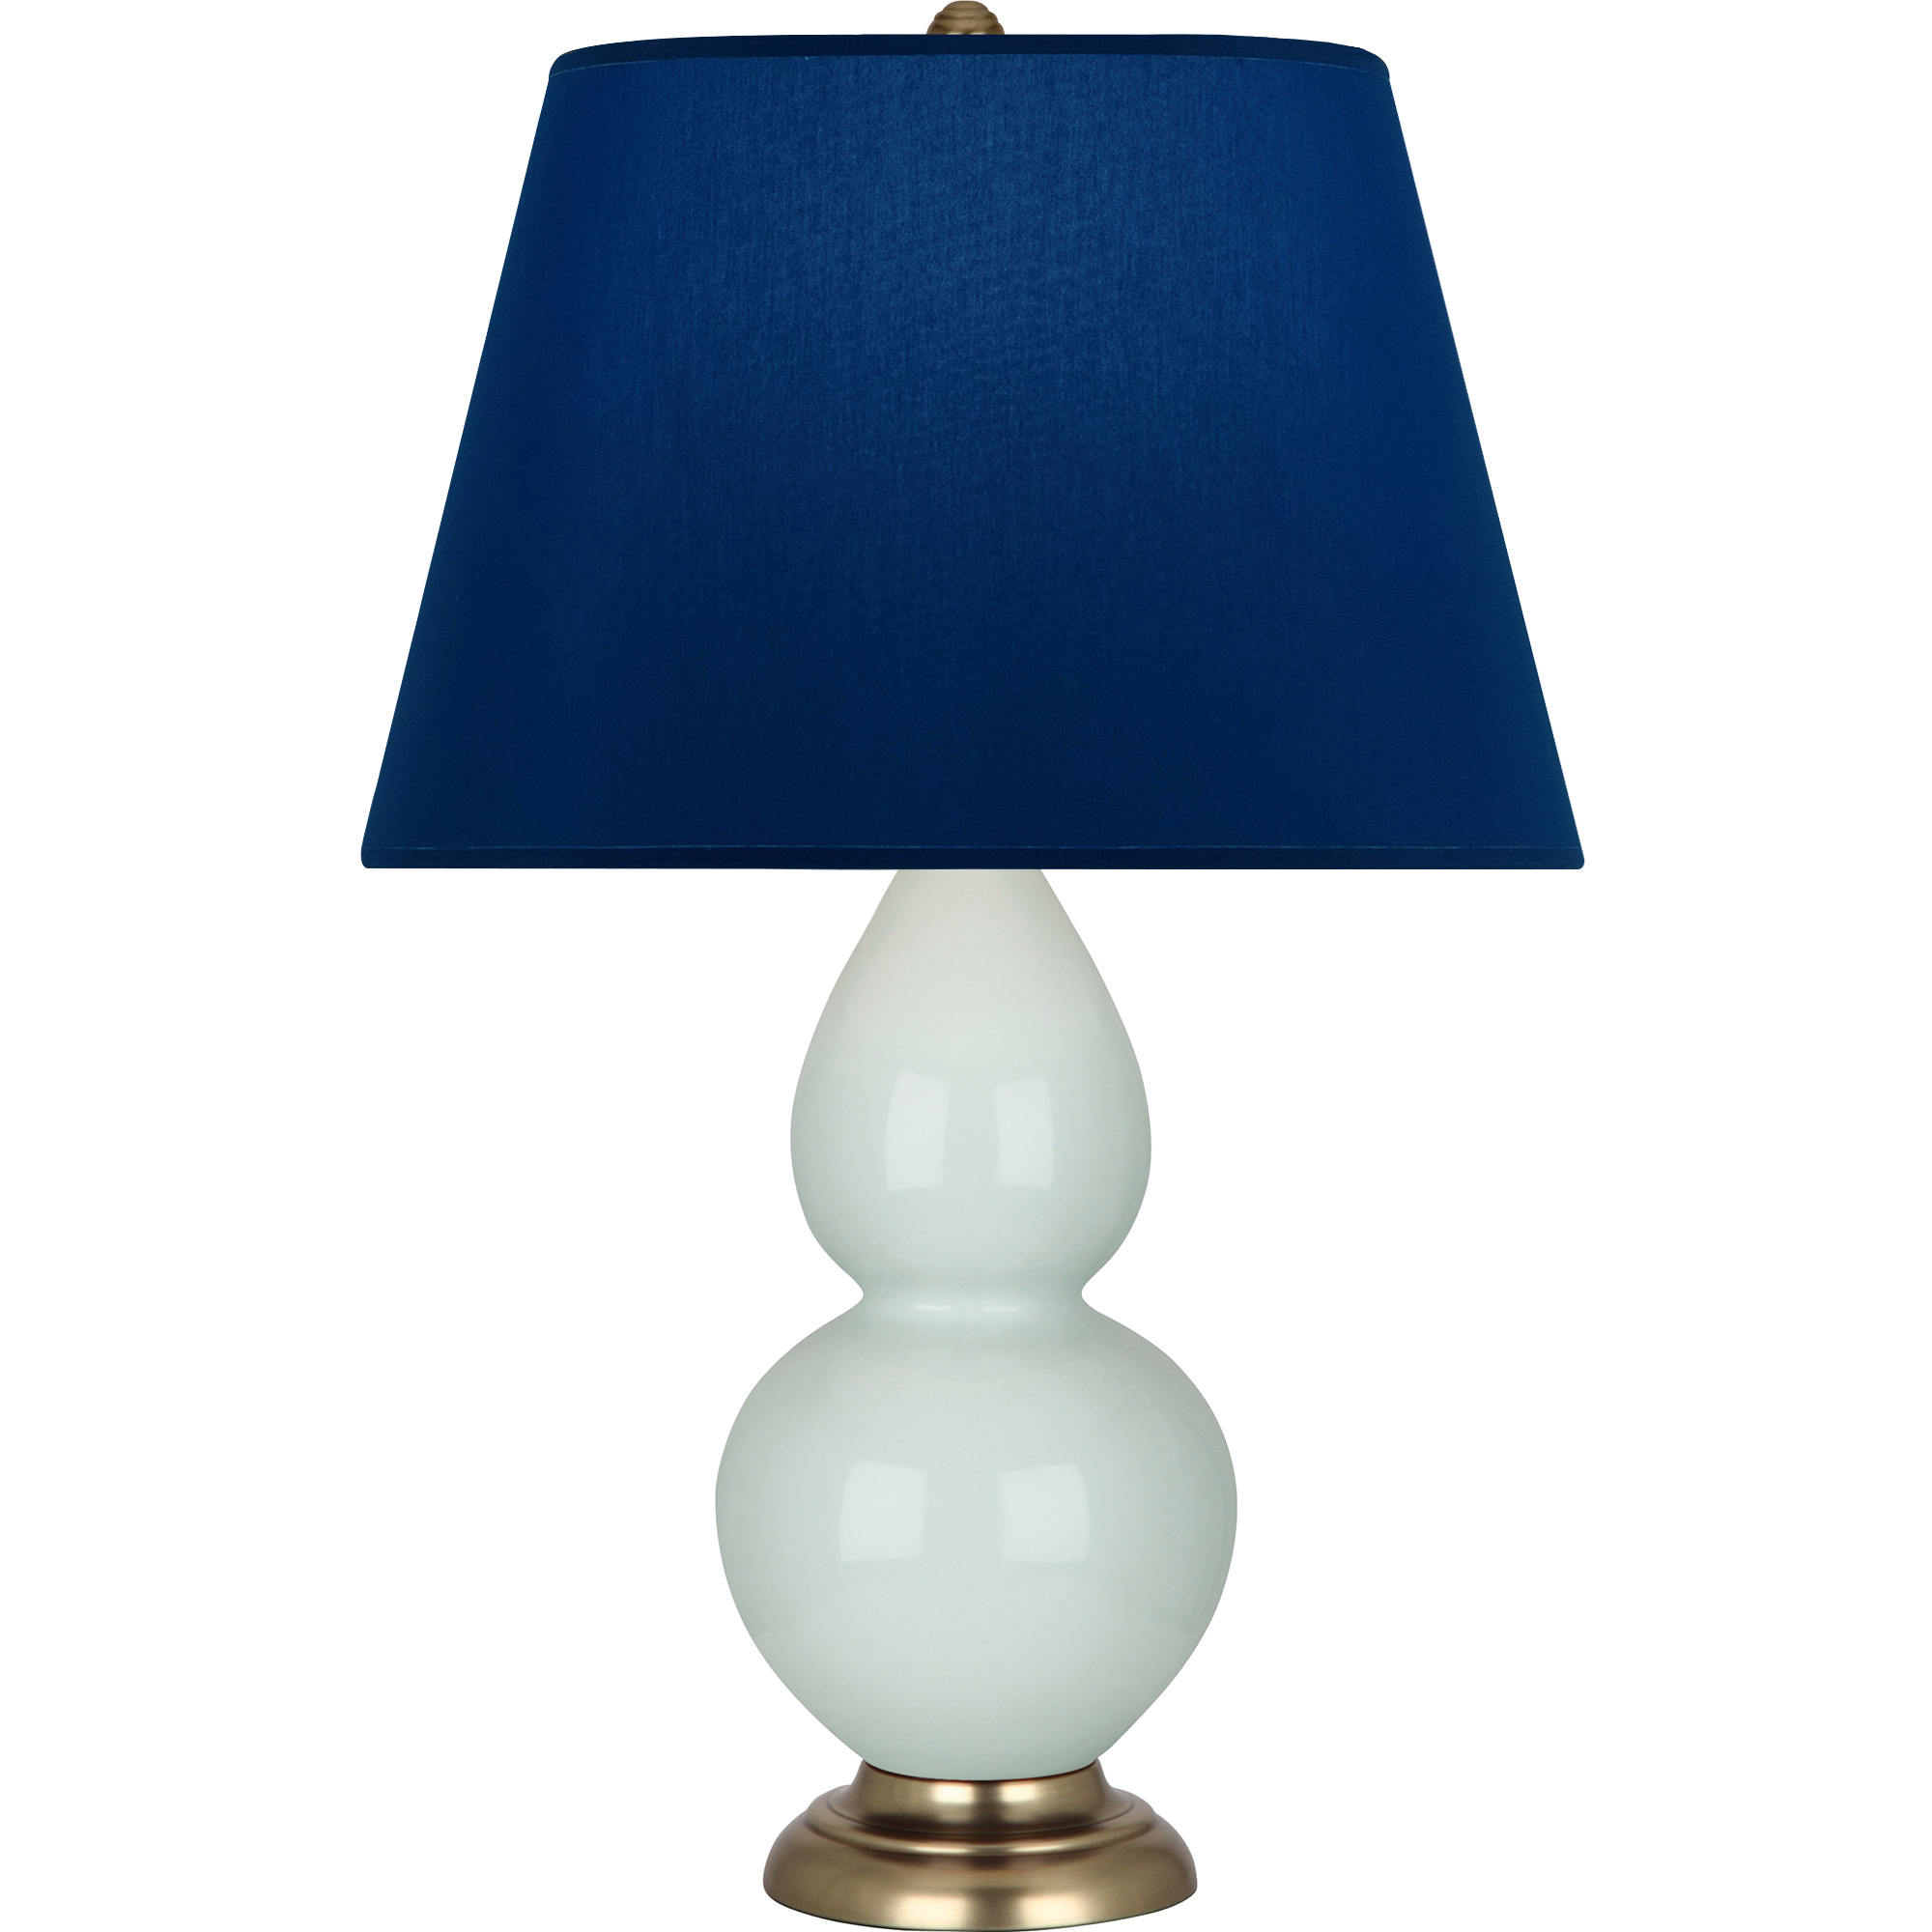 Double Gourd Table Lamp Style #1789N